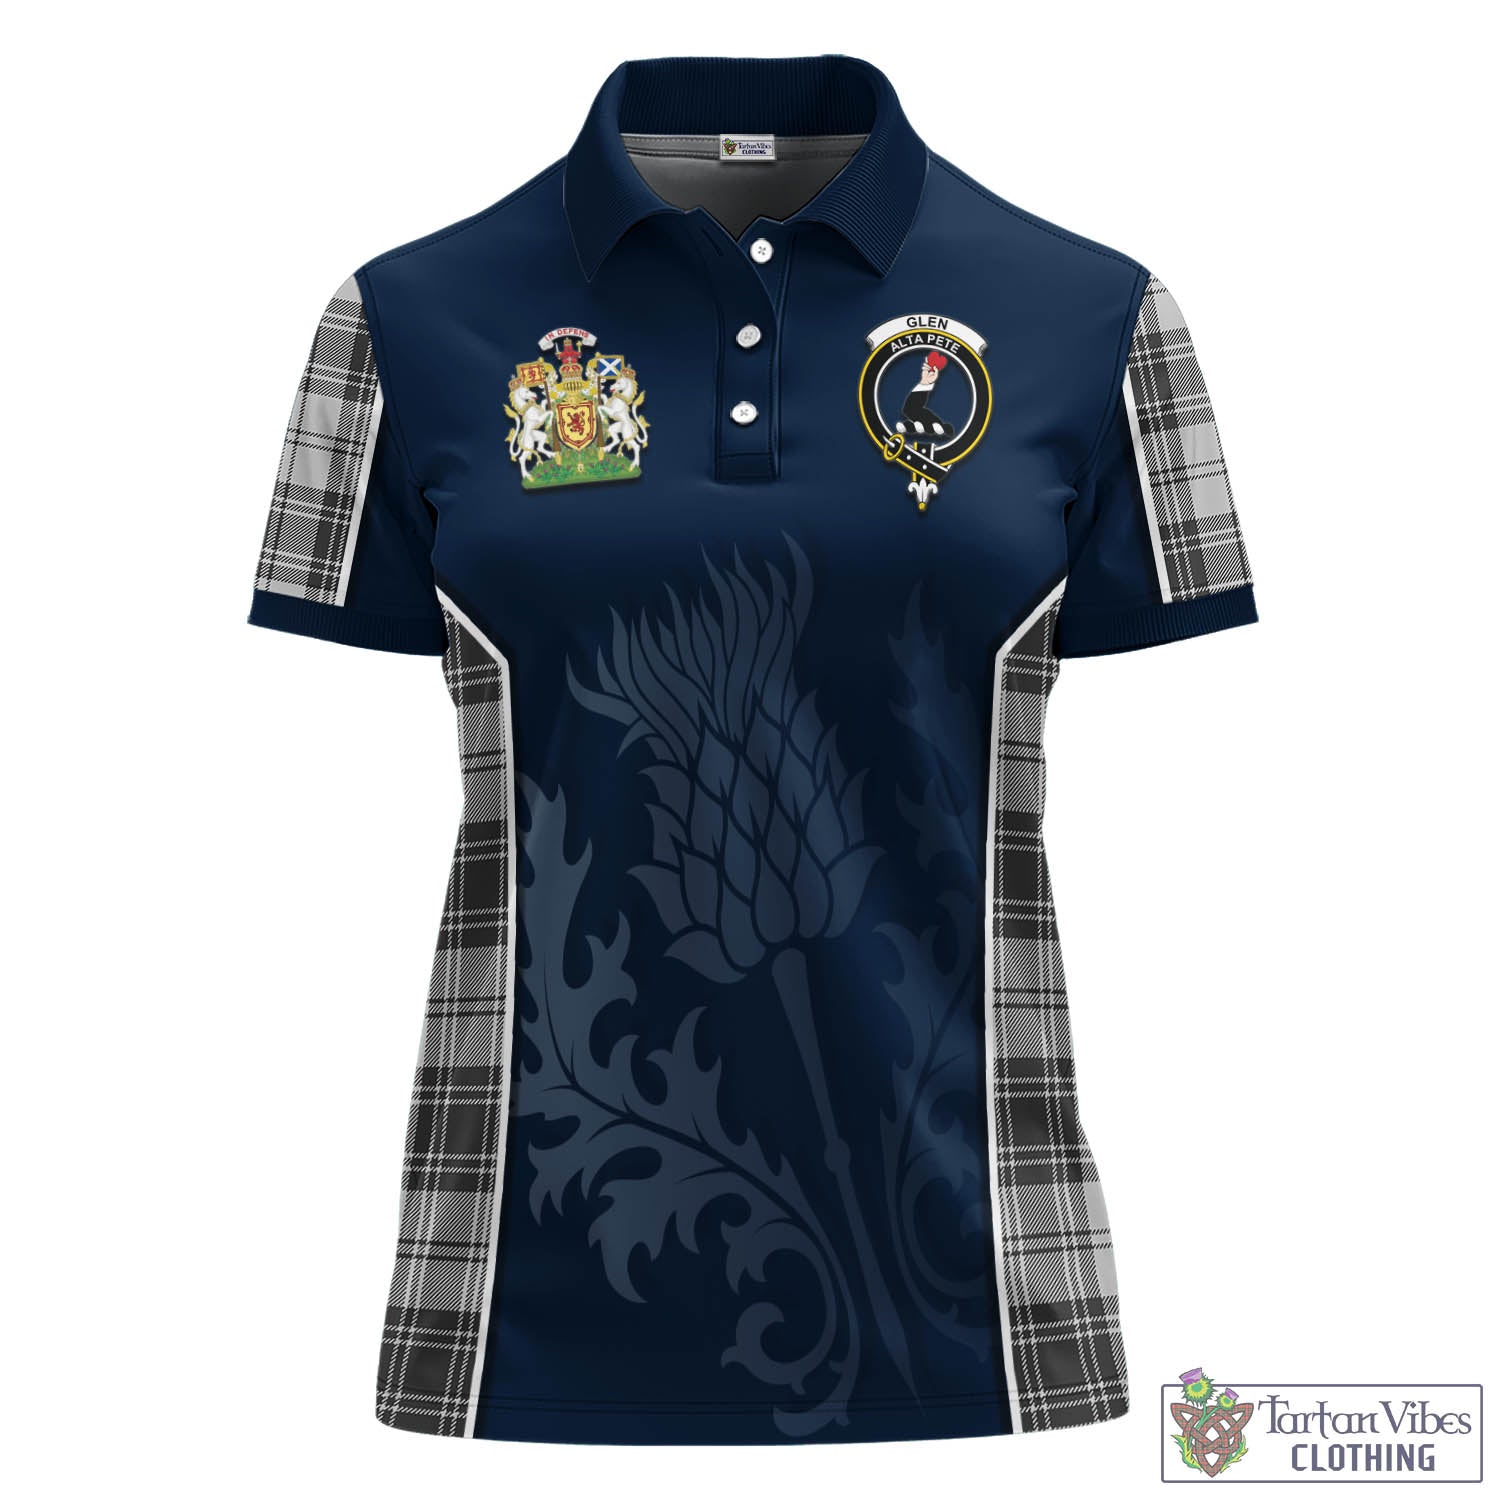 Tartan Vibes Clothing Glen Tartan Women's Polo Shirt with Family Crest and Scottish Thistle Vibes Sport Style